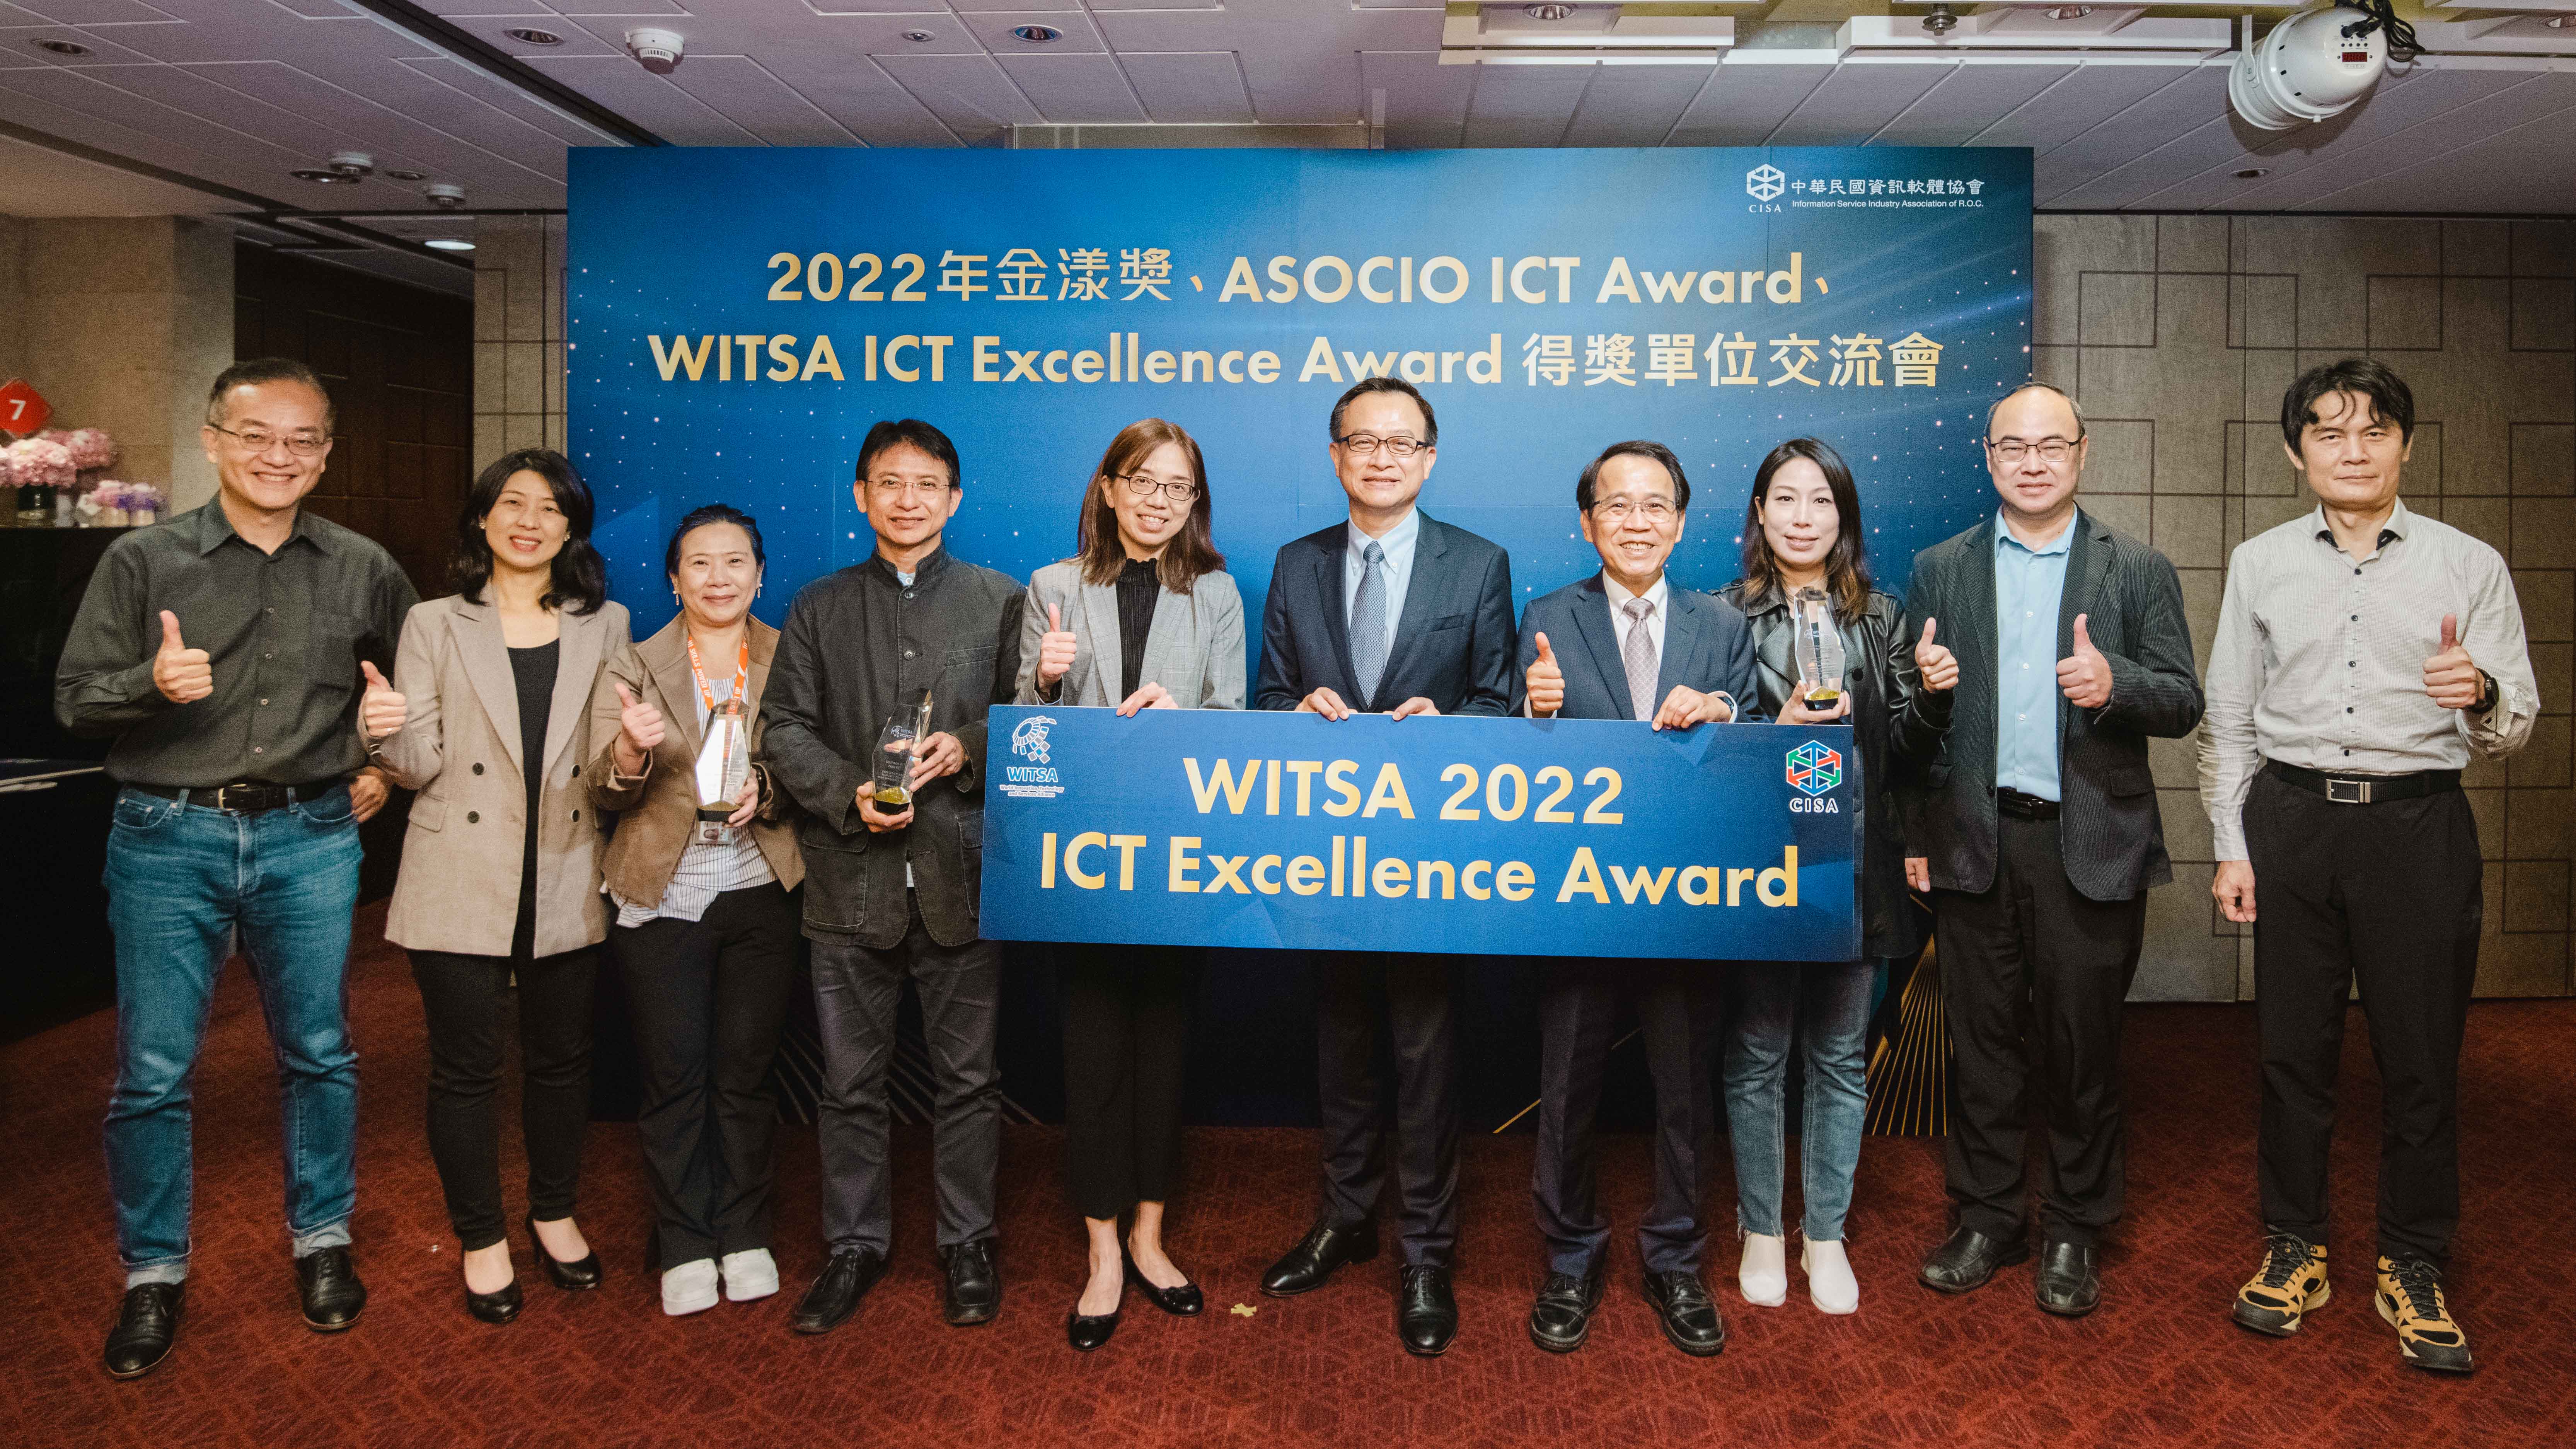 City officials at the 2022 IDC Smart City AsiaPacific Awards Ceremony